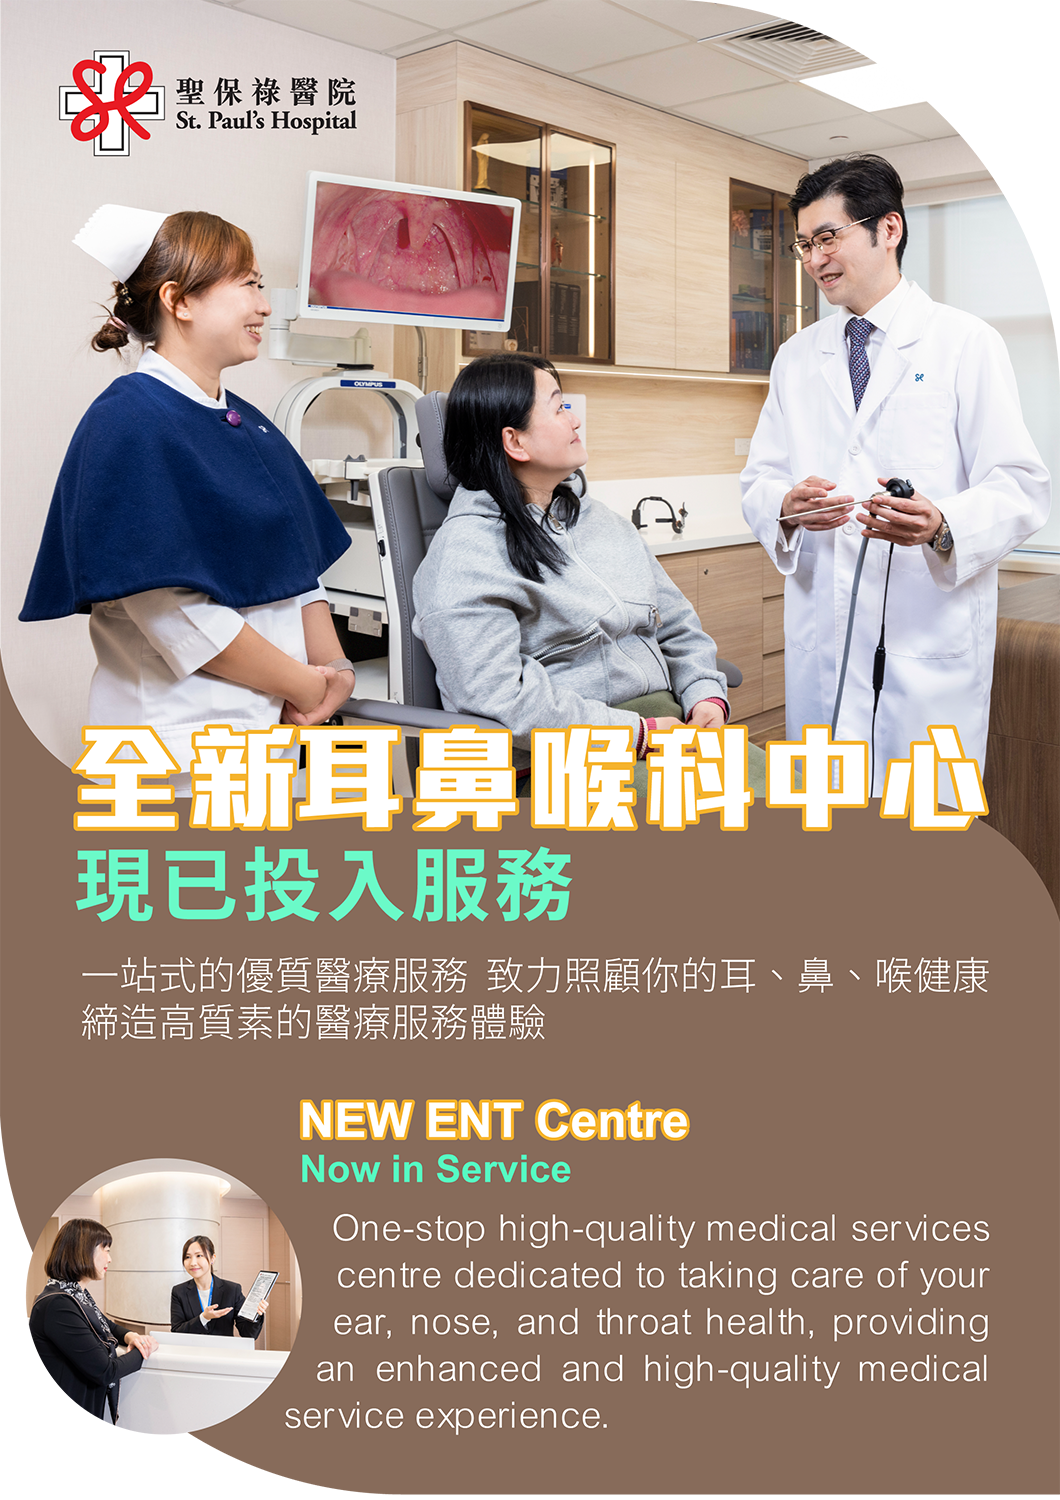 NEW ENT Centre Now in Service